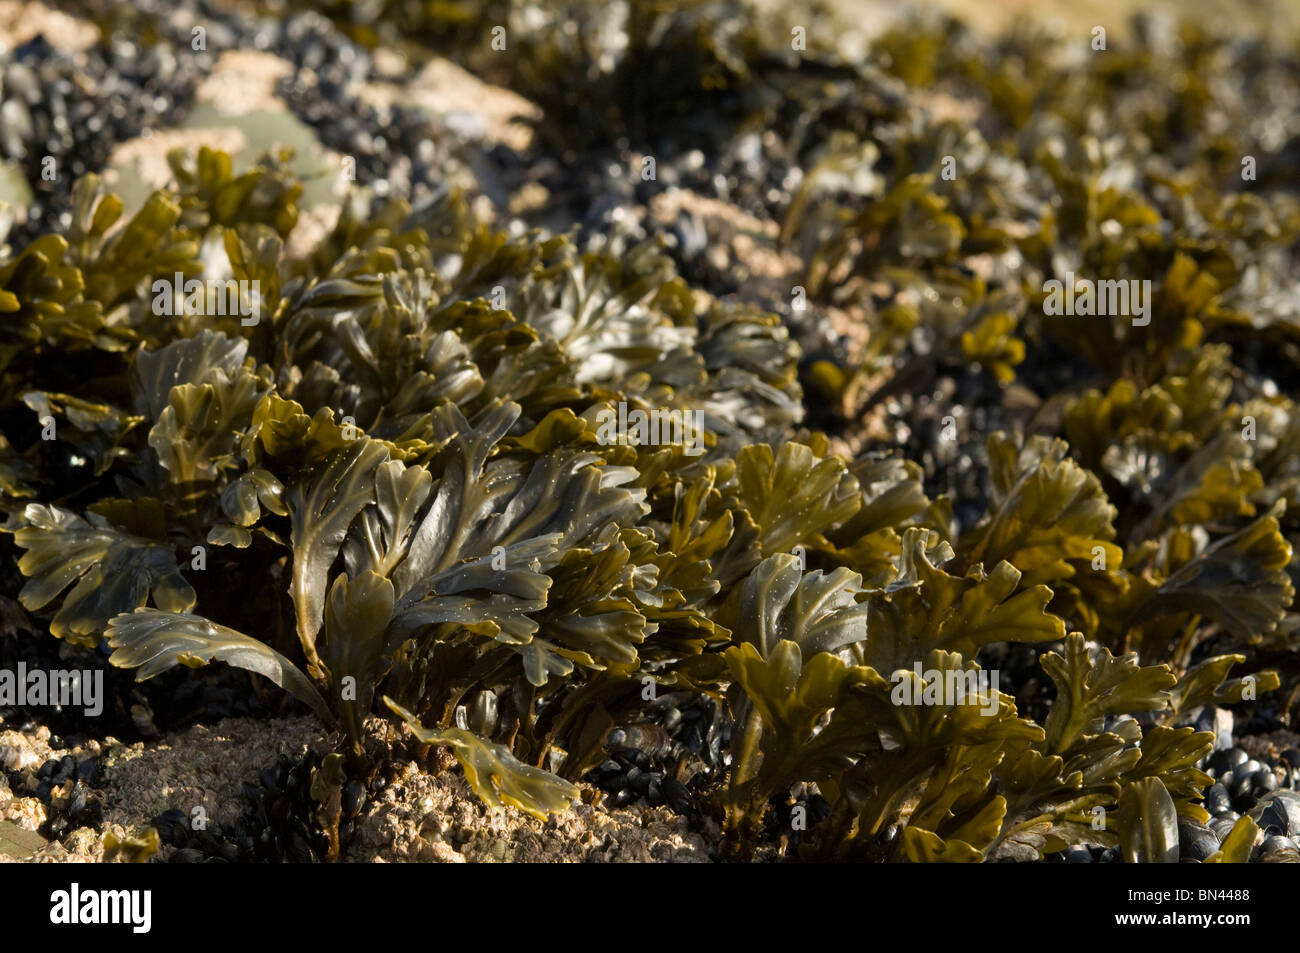 Channelled wrack, Pelvetia canaliculata, intertidal, Broad Haven, Pembrokeshire, Wales, UK, Europe Stock Photo